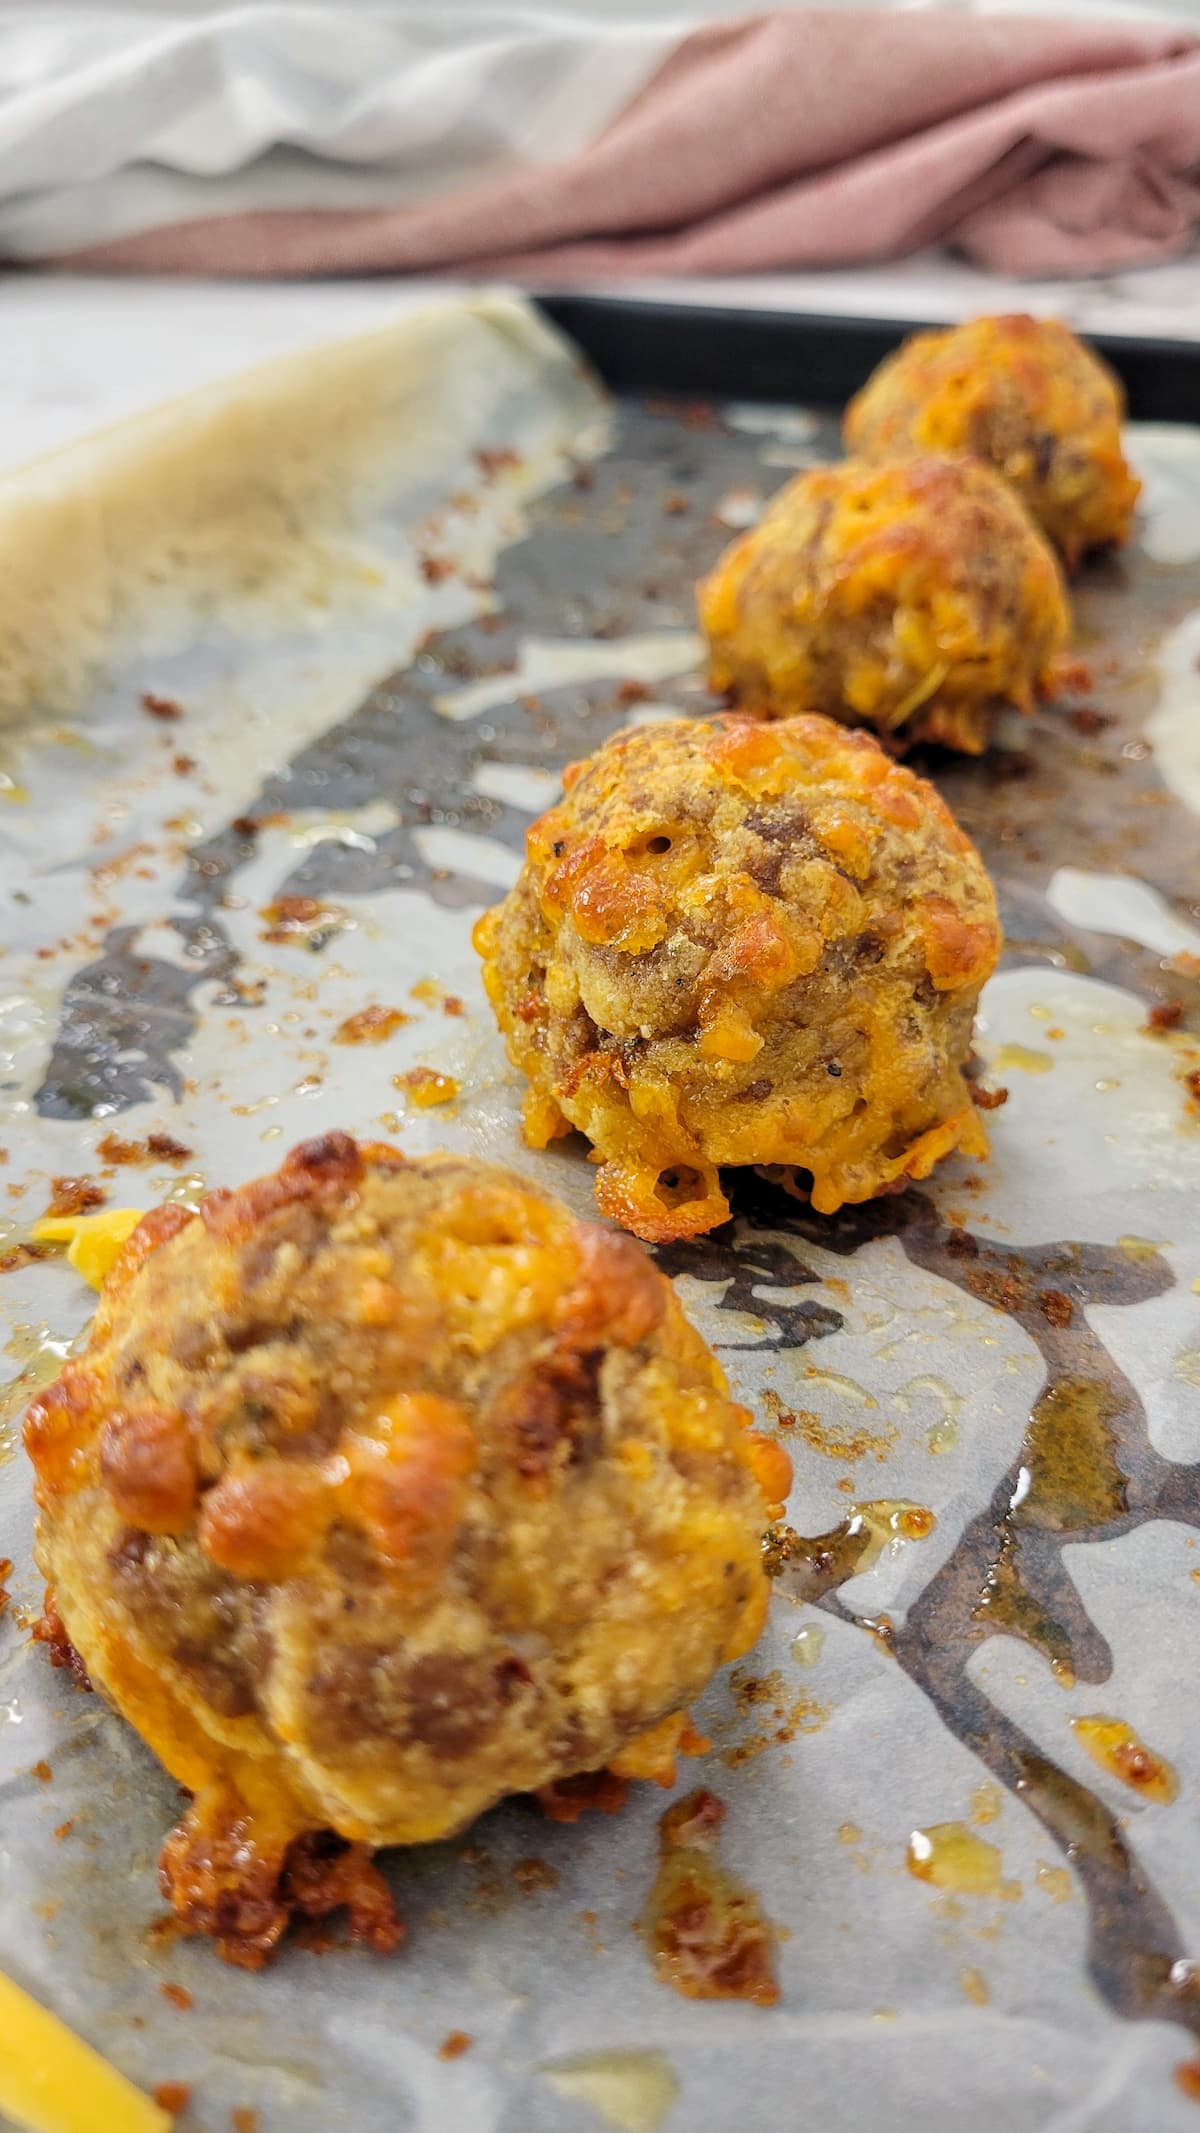 4 cooked sausage balls on a parchment lined baking sheet